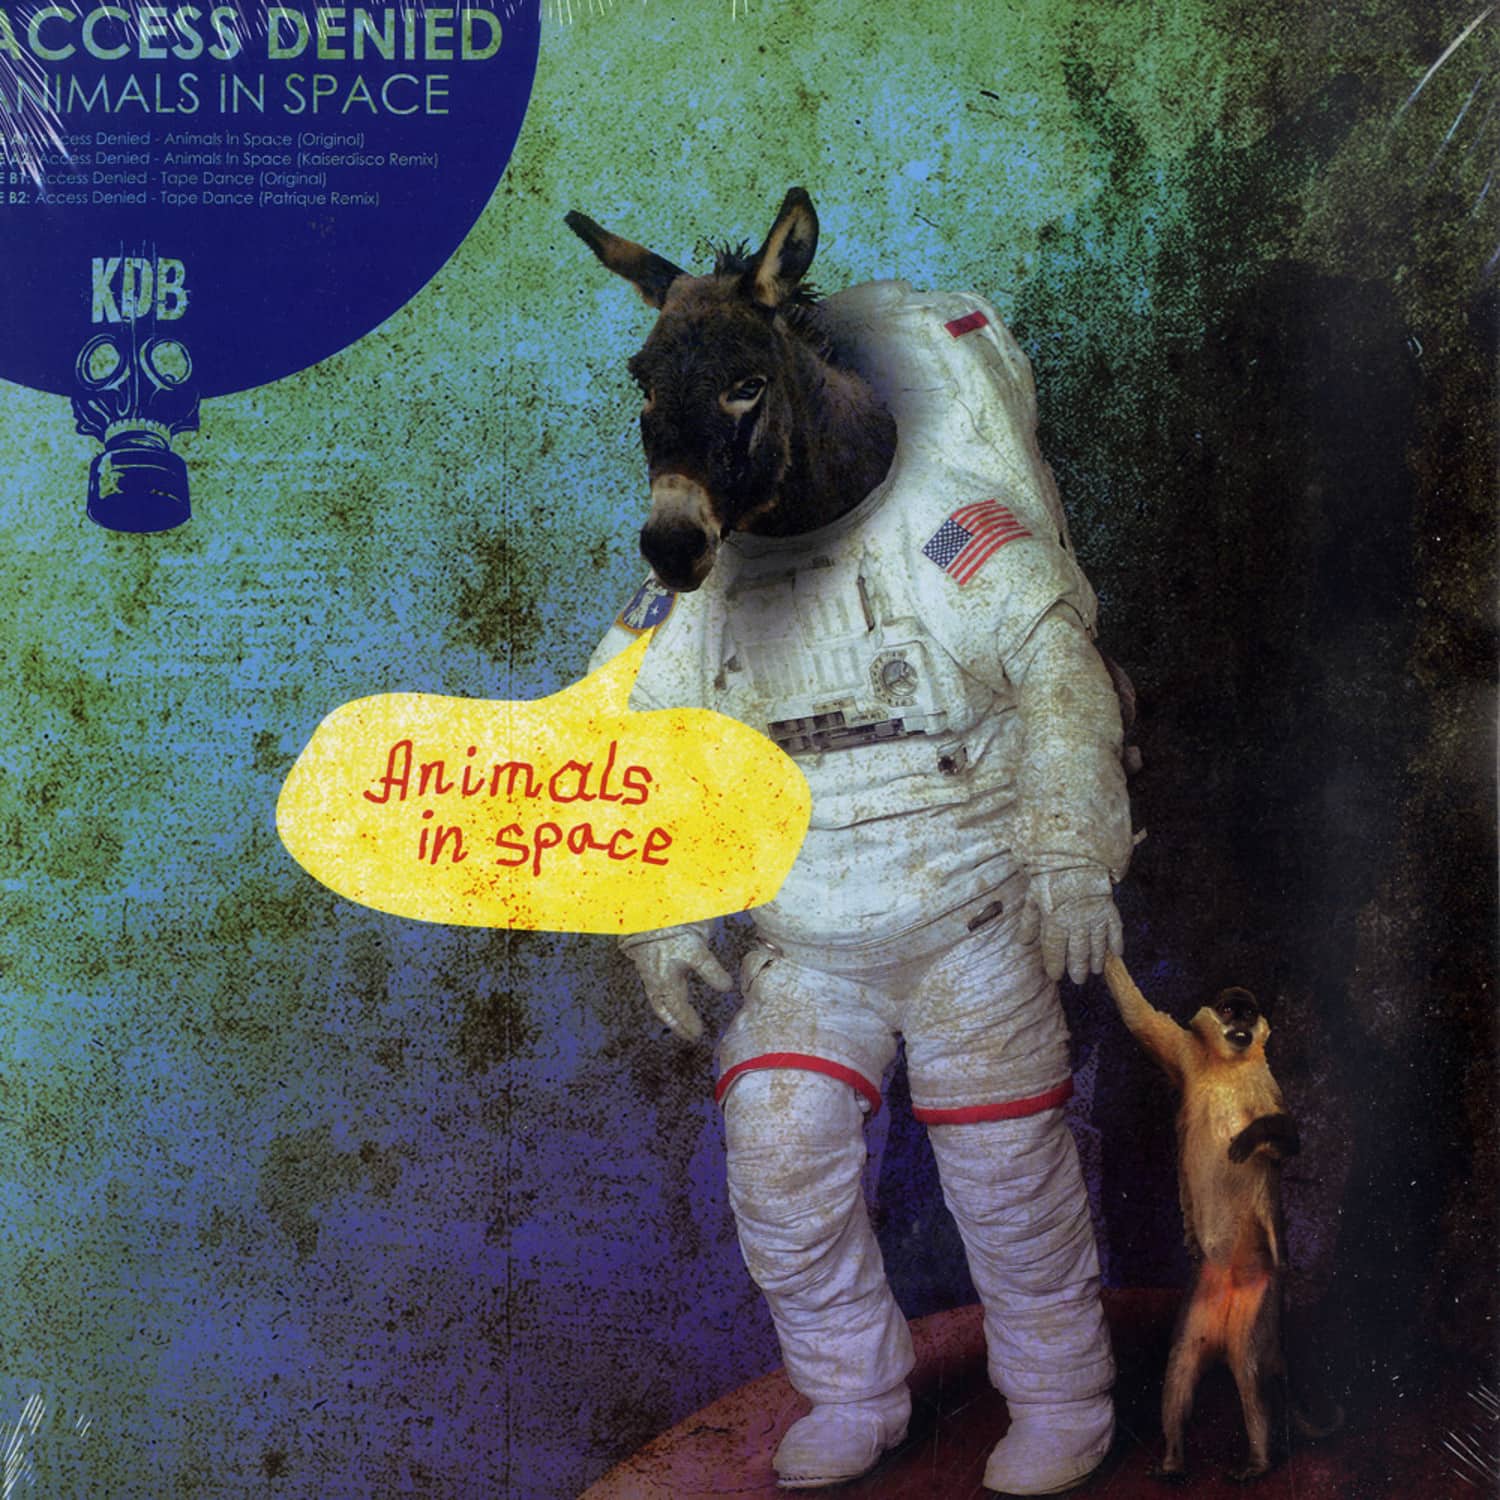 Access Denied - ANIMALS IN SPACE